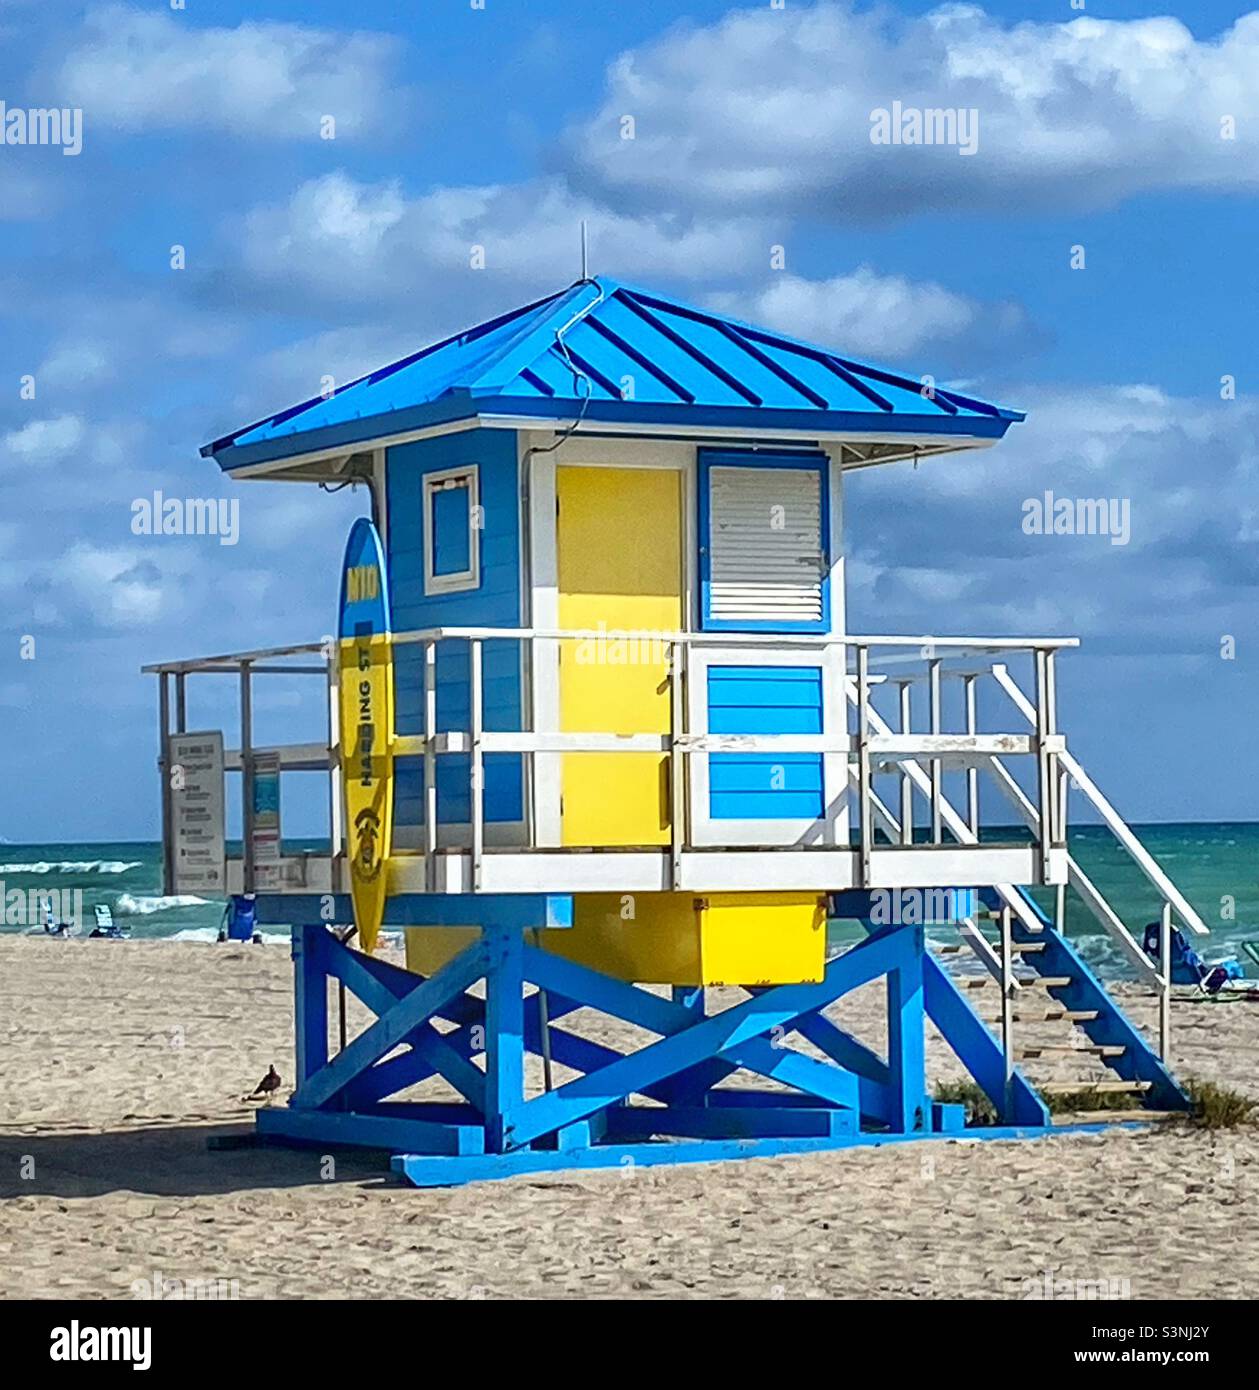 Lifeguard tower on Hollywood beach in Florida Stock Photo